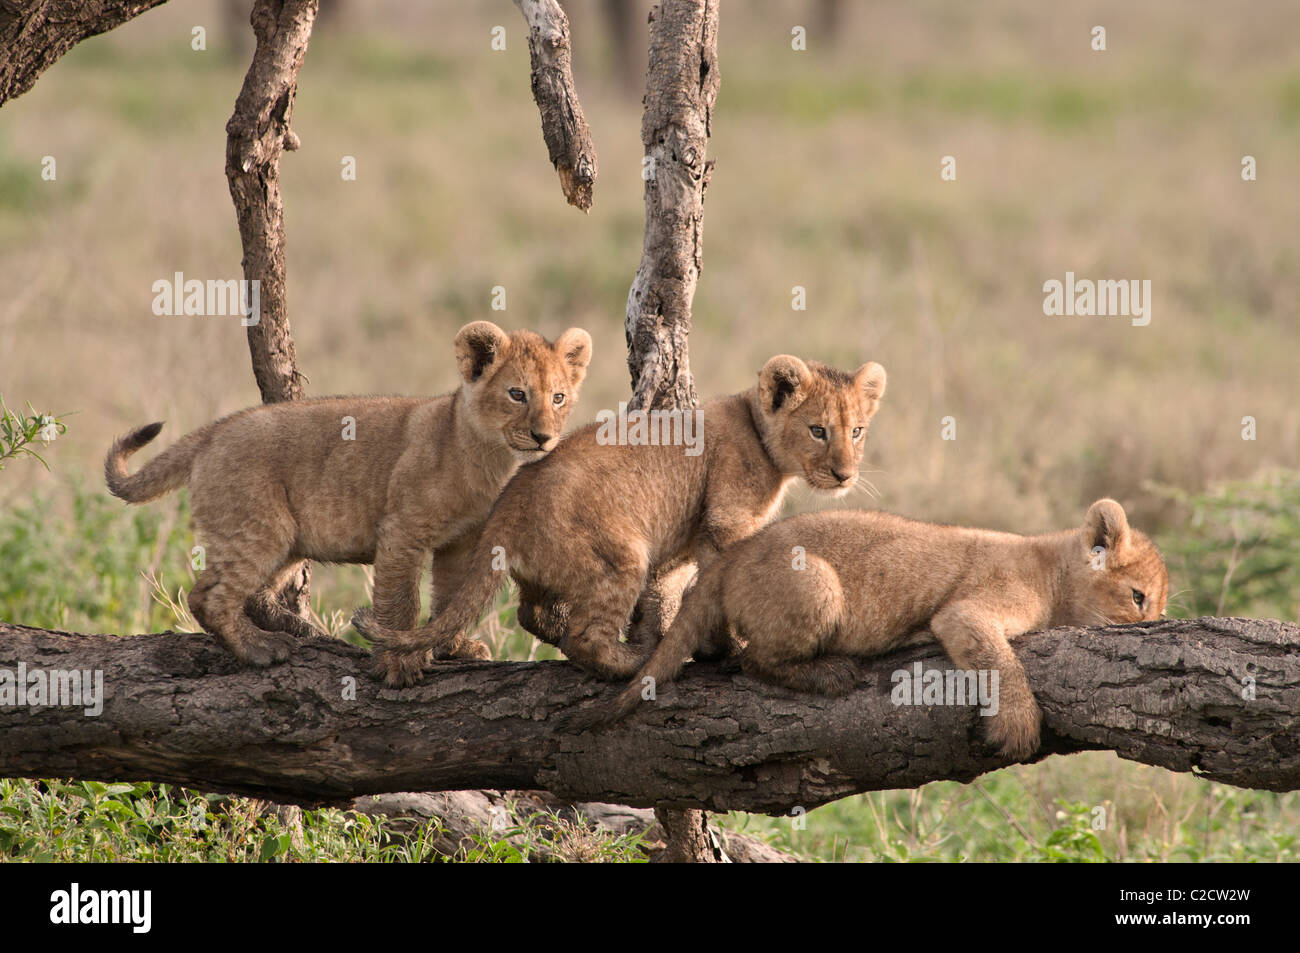 Stpck photo of three lion cubs playing on a log. Stock Photo